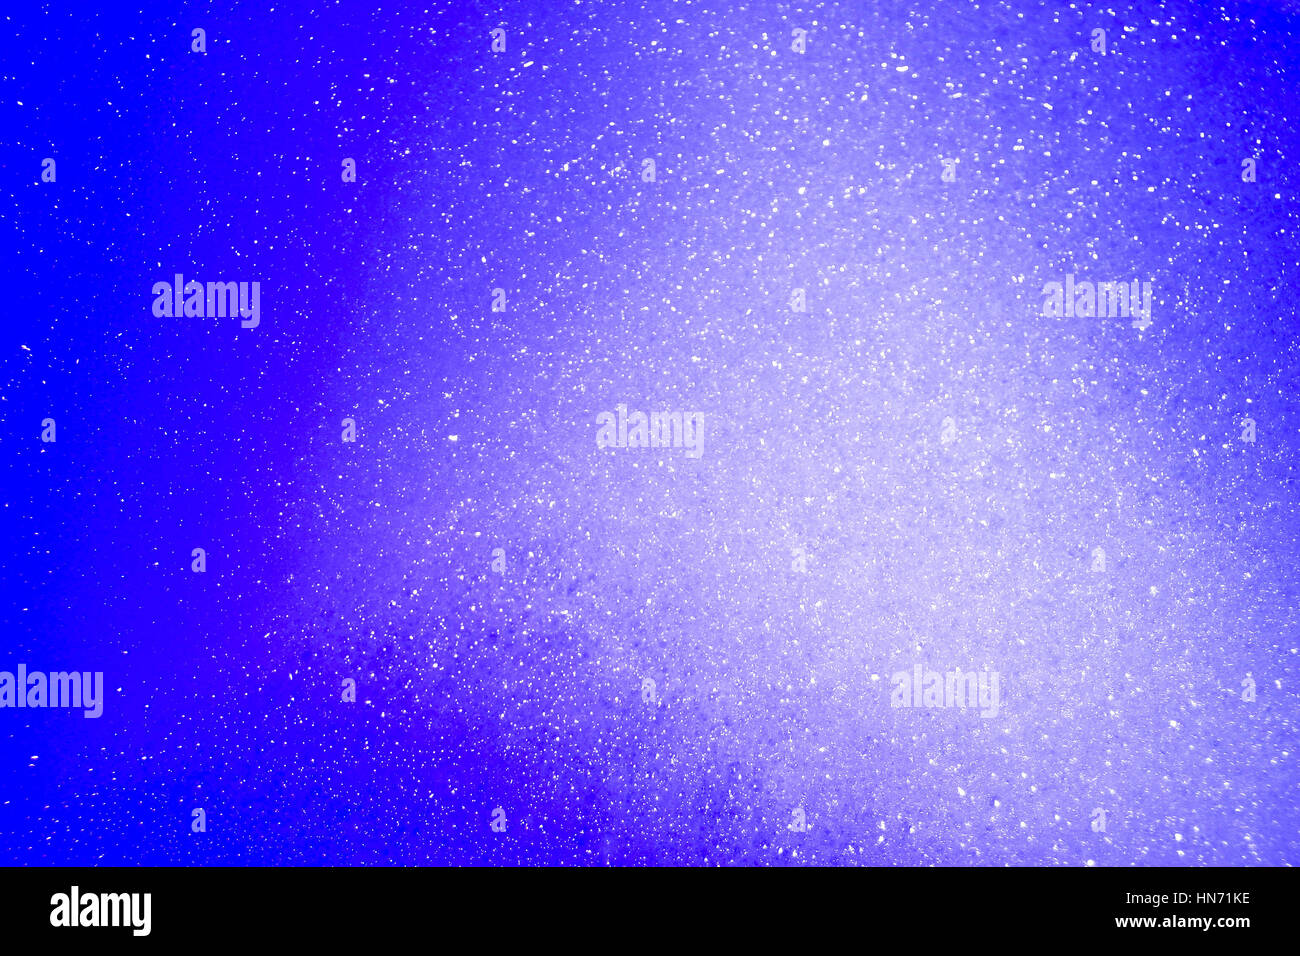 Shimmer background for commercial use presentations Stock Photo